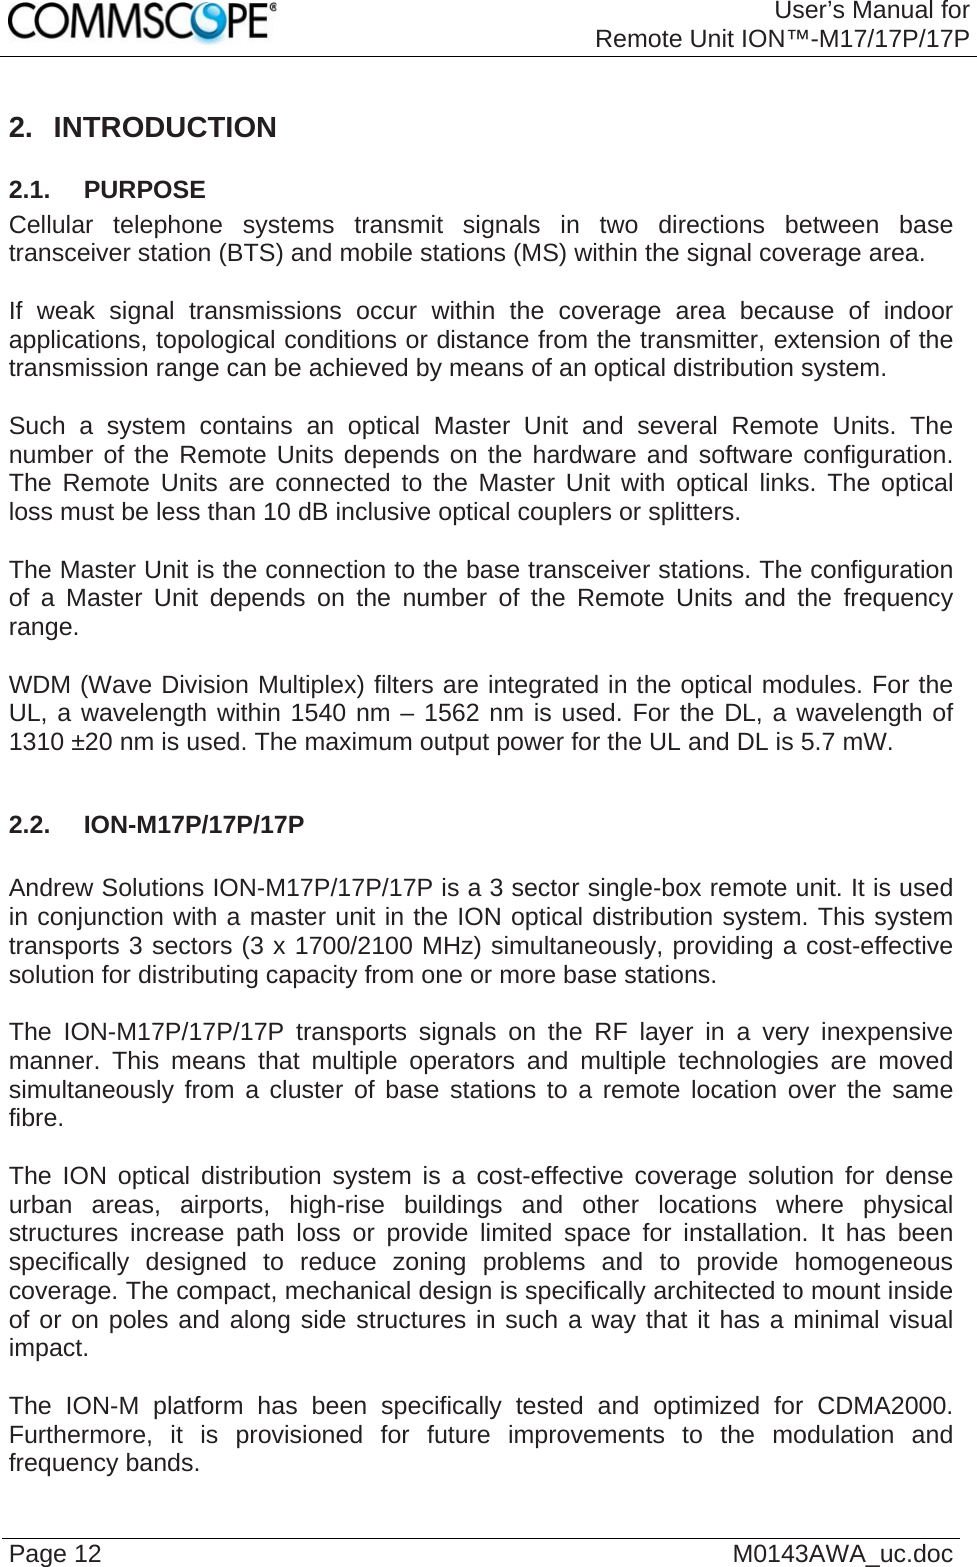 User’s Manual forRemote Unit ION™-M17/17P/17P Page 12  M0143AWA_uc.doc 2. INTRODUCTION 2.1.  PURPOSE Cellular telephone systems transmit signals in two directions between base transceiver station (BTS) and mobile stations (MS) within the signal coverage area.  If weak signal transmissions occur within the coverage area because of indoor applications, topological conditions or distance from the transmitter, extension of the transmission range can be achieved by means of an optical distribution system.  Such a system contains an optical Master Unit and several Remote Units. The number of the Remote Units depends on the hardware and software configuration. The Remote Units are connected to the Master Unit with optical links. The optical loss must be less than 10 dB inclusive optical couplers or splitters.  The Master Unit is the connection to the base transceiver stations. The configuration of a Master Unit depends on the number of the Remote Units and the frequency range.   WDM (Wave Division Multiplex) filters are integrated in the optical modules. For the UL, a wavelength within 1540 nm – 1562 nm is used. For the DL, a wavelength of 1310 ±20 nm is used. The maximum output power for the UL and DL is 5.7 mW.  2.2.  ION-M17P/17P/17P  Andrew Solutions ION-M17P/17P/17P is a 3 sector single-box remote unit. It is used in conjunction with a master unit in the ION optical distribution system. This system transports 3 sectors (3 x 1700/2100 MHz) simultaneously, providing a cost-effective solution for distributing capacity from one or more base stations.  The ION-M17P/17P/17P transports signals on the RF layer in a very inexpensive manner. This means that multiple operators and multiple technologies are moved simultaneously from a cluster of base stations to a remote location over the same fibre.  The ION optical distribution system is a cost-effective coverage solution for dense urban areas, airports, high-rise buildings and other locations where physical structures increase path loss or provide limited space for installation. It has been specifically designed to reduce zoning problems and to provide homogeneous coverage. The compact, mechanical design is specifically architected to mount inside of or on poles and along side structures in such a way that it has a minimal visual impact.  The ION-M platform has been specifically tested and optimized for CDMA2000. Furthermore, it is provisioned for future improvements to the modulation and frequency bands. 